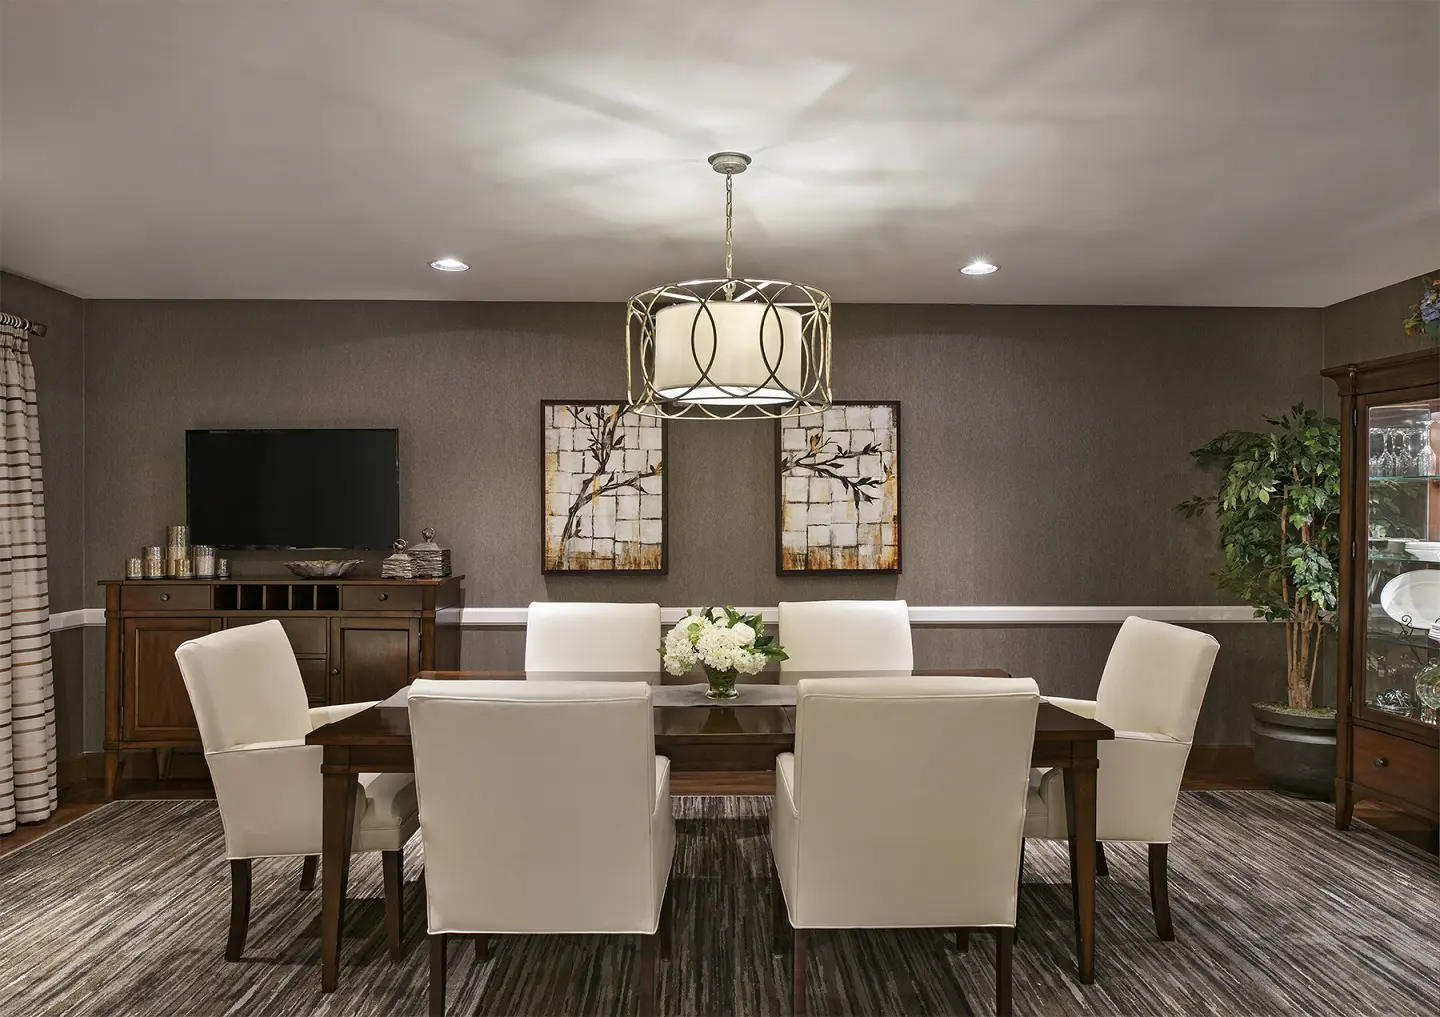 Private dining room or meeting area at American House Macedonia, a senior living community in Macedonia, Ohio.